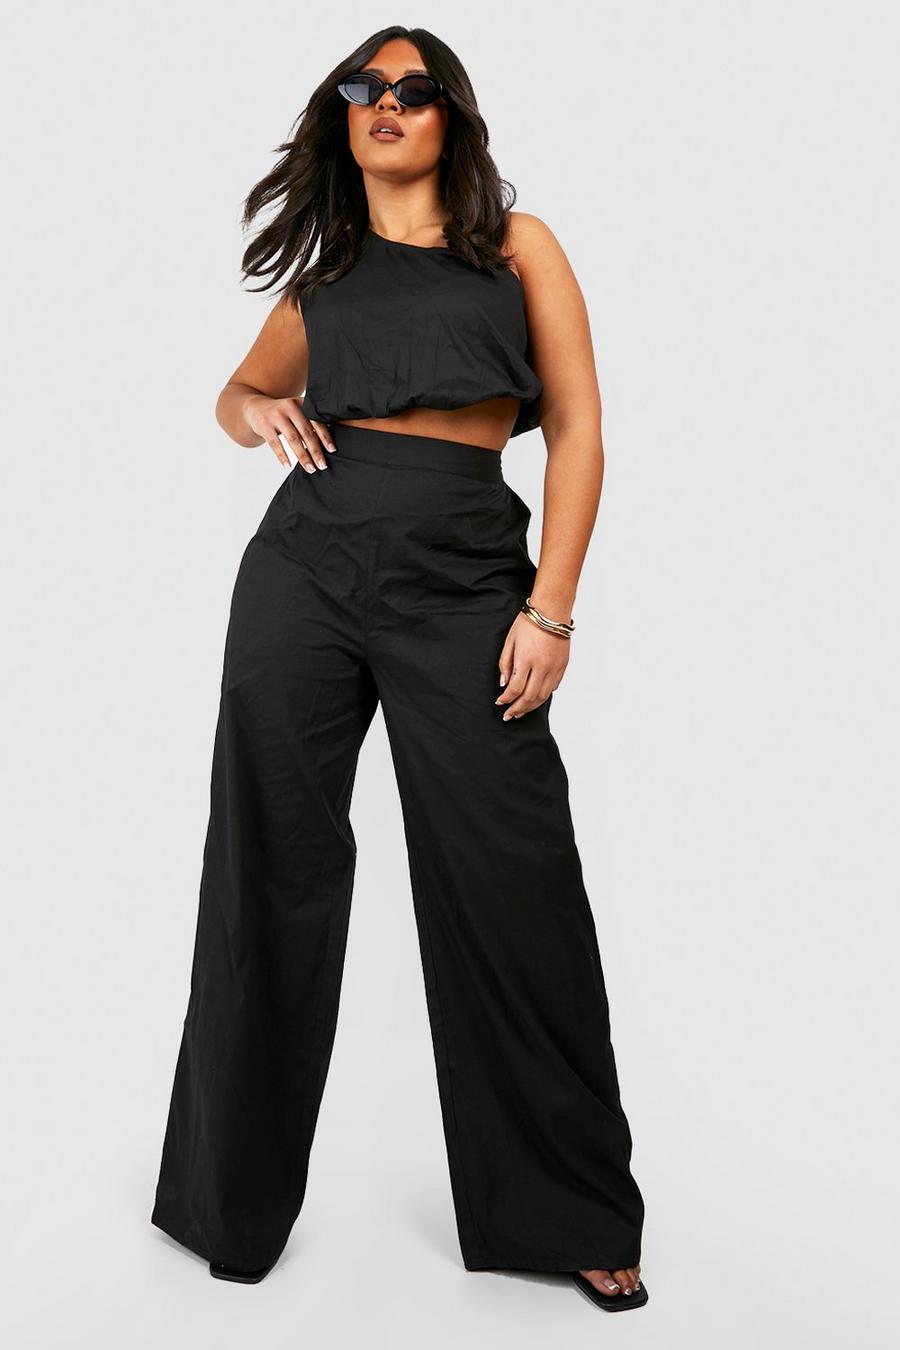 XL-5XL Plus Size Set Women Casual Ladies Top And Pants Suits Two